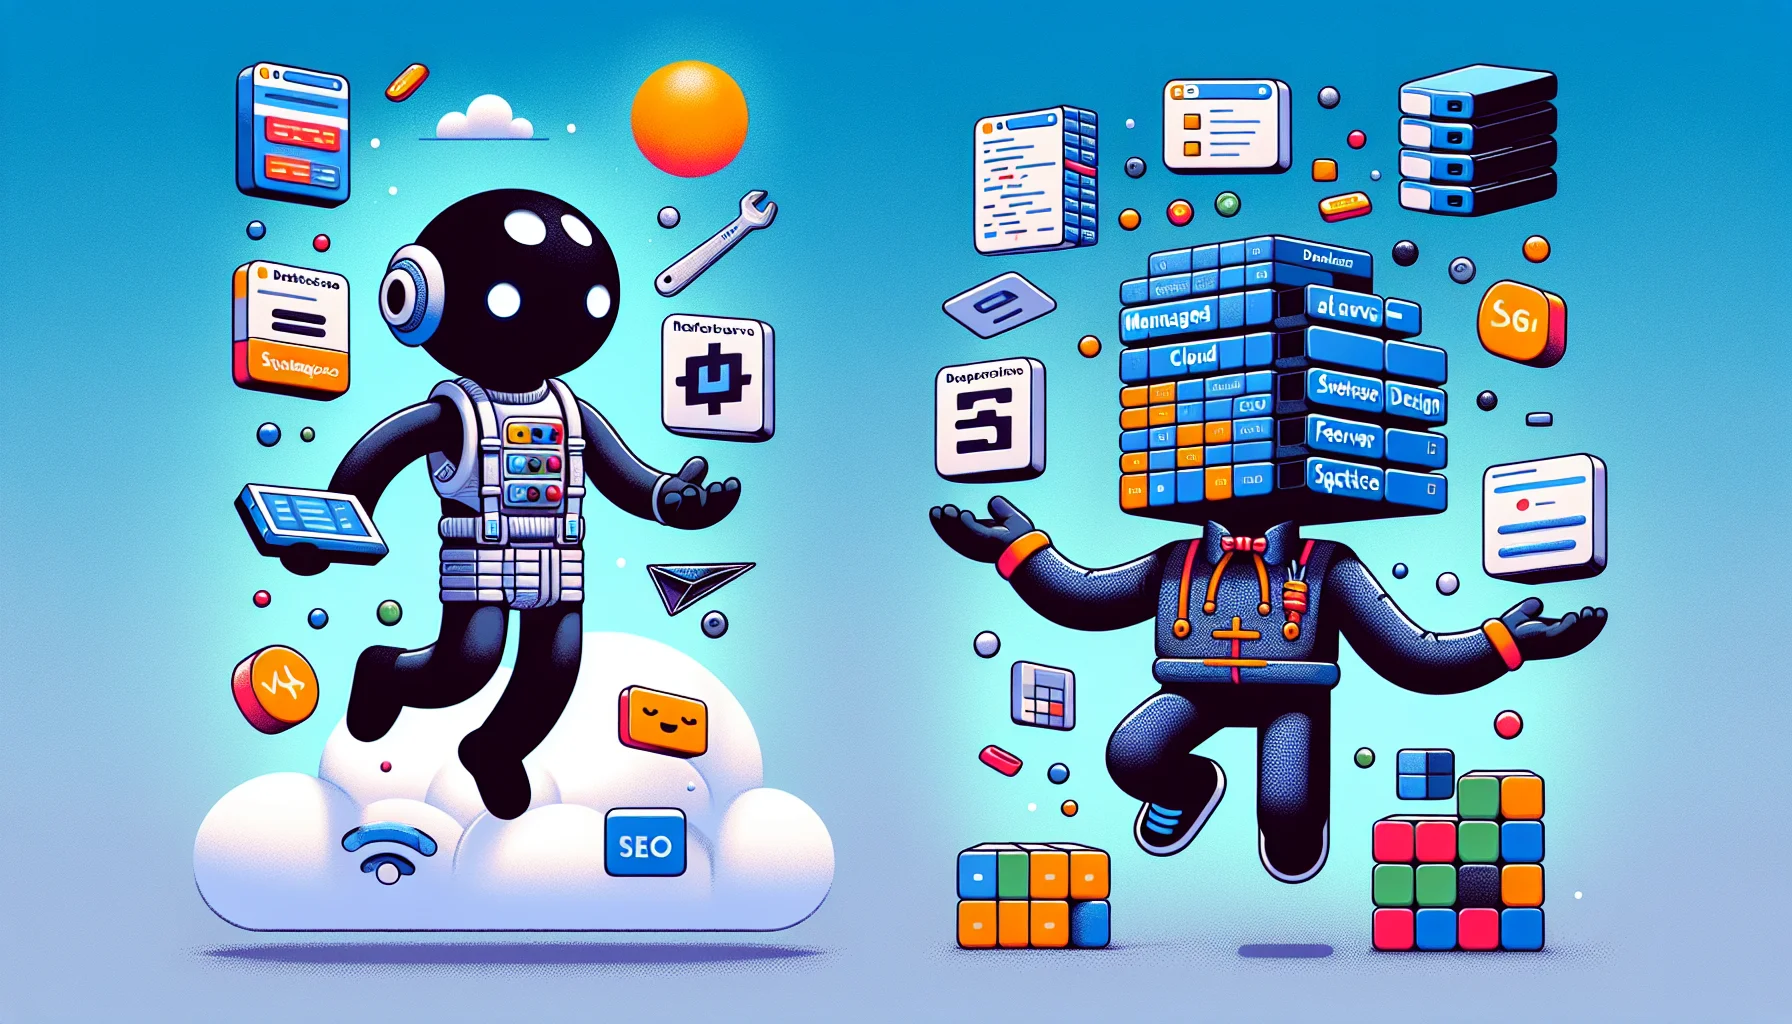 Create a vivid and humorous image that metaphorically represents Rackspace Managed Cloud and Squarespace in a web hosting context. Depict two cartoon-style characters: one wearing a futuristic outfit and levitating (representing Rackspace Managed Cloud) and the other wearing a trendy, modern outfit with tiny squares in the pattern (representing Squarespace). The Rackspace character is floating on a cloud, confidently juggling various web elements like databases, server symbols, and coding script. The Squarespace character is playfully constructing a website using modular square blocks, with different block types like website layout, responsive design block, e-commerce features block, and an SEO tools block.